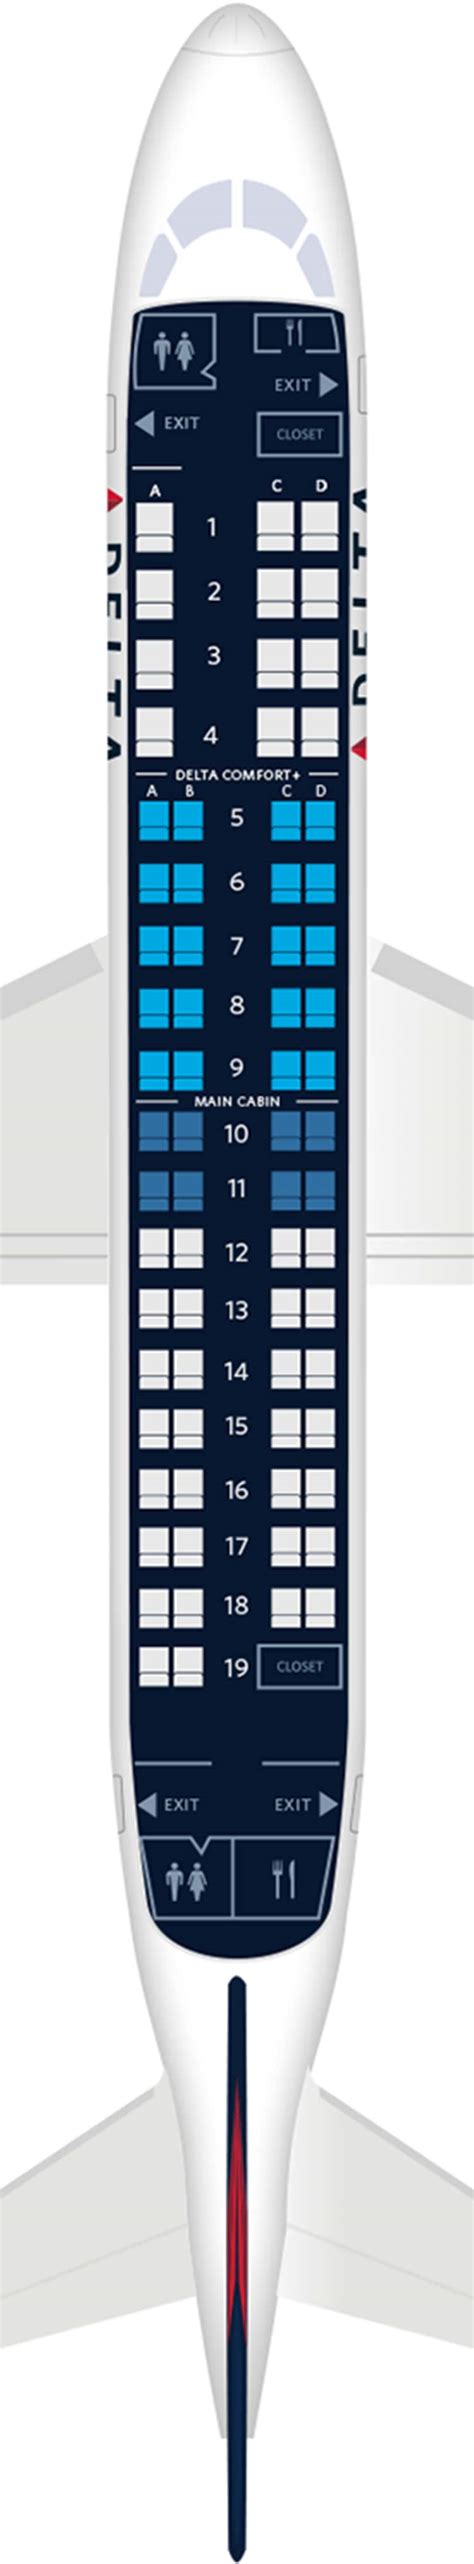 Embraer 175 seat map. United Airlines Seat Maps, Seating Charts, and Seat Reviews United Airlines Seat Maps, Seating Charts, and Seat Reviews ... [Seat 7B on a Embraer 175] Like. Downvote ... 